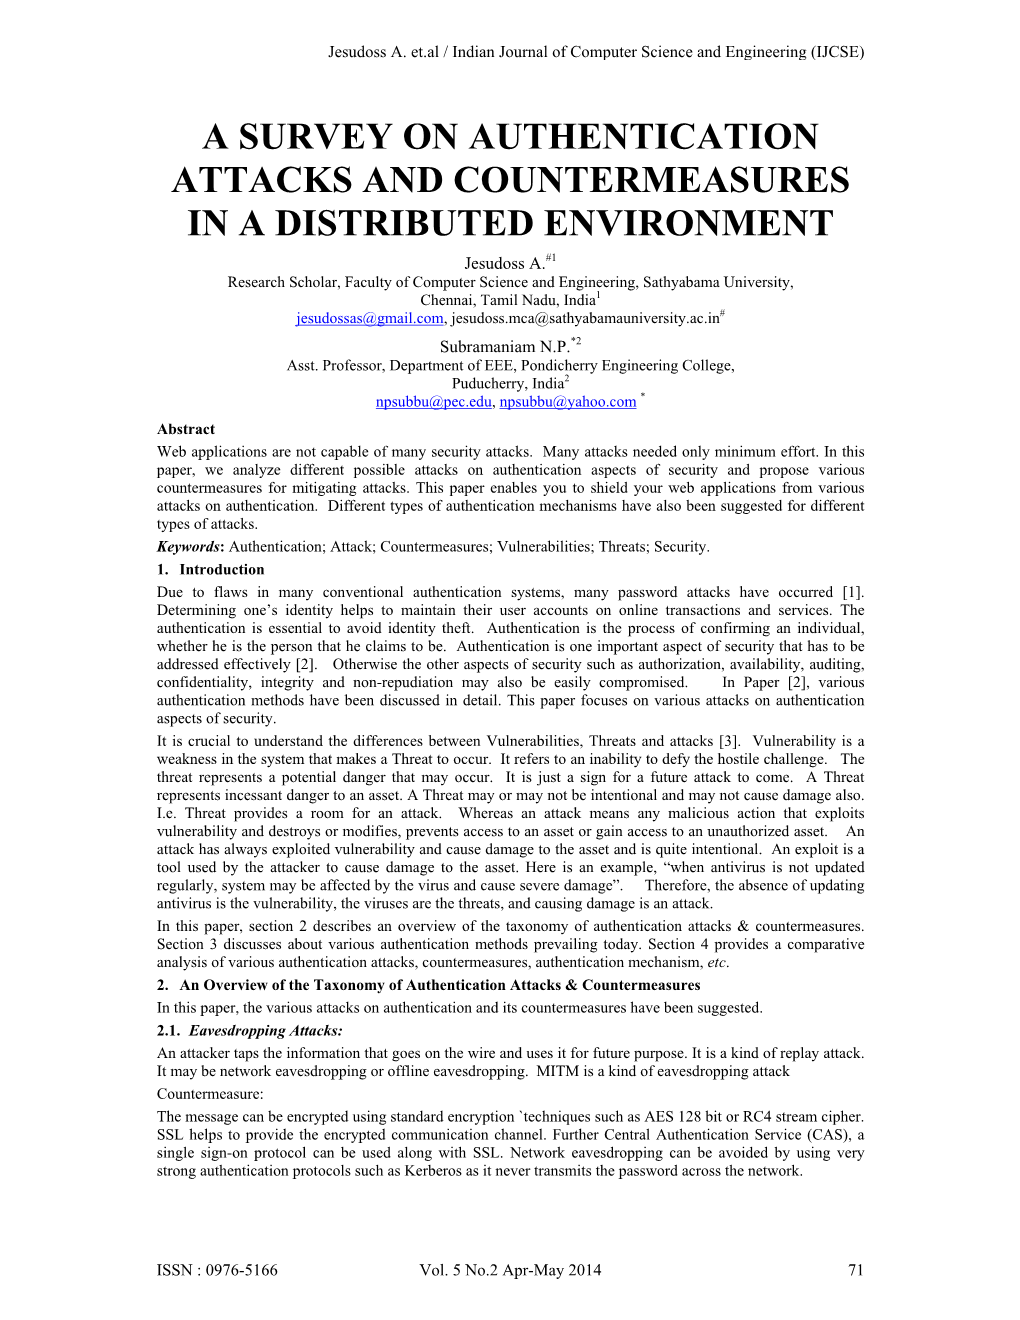 A Survey on Authentication Attacks and Countermeasures in a Distributed